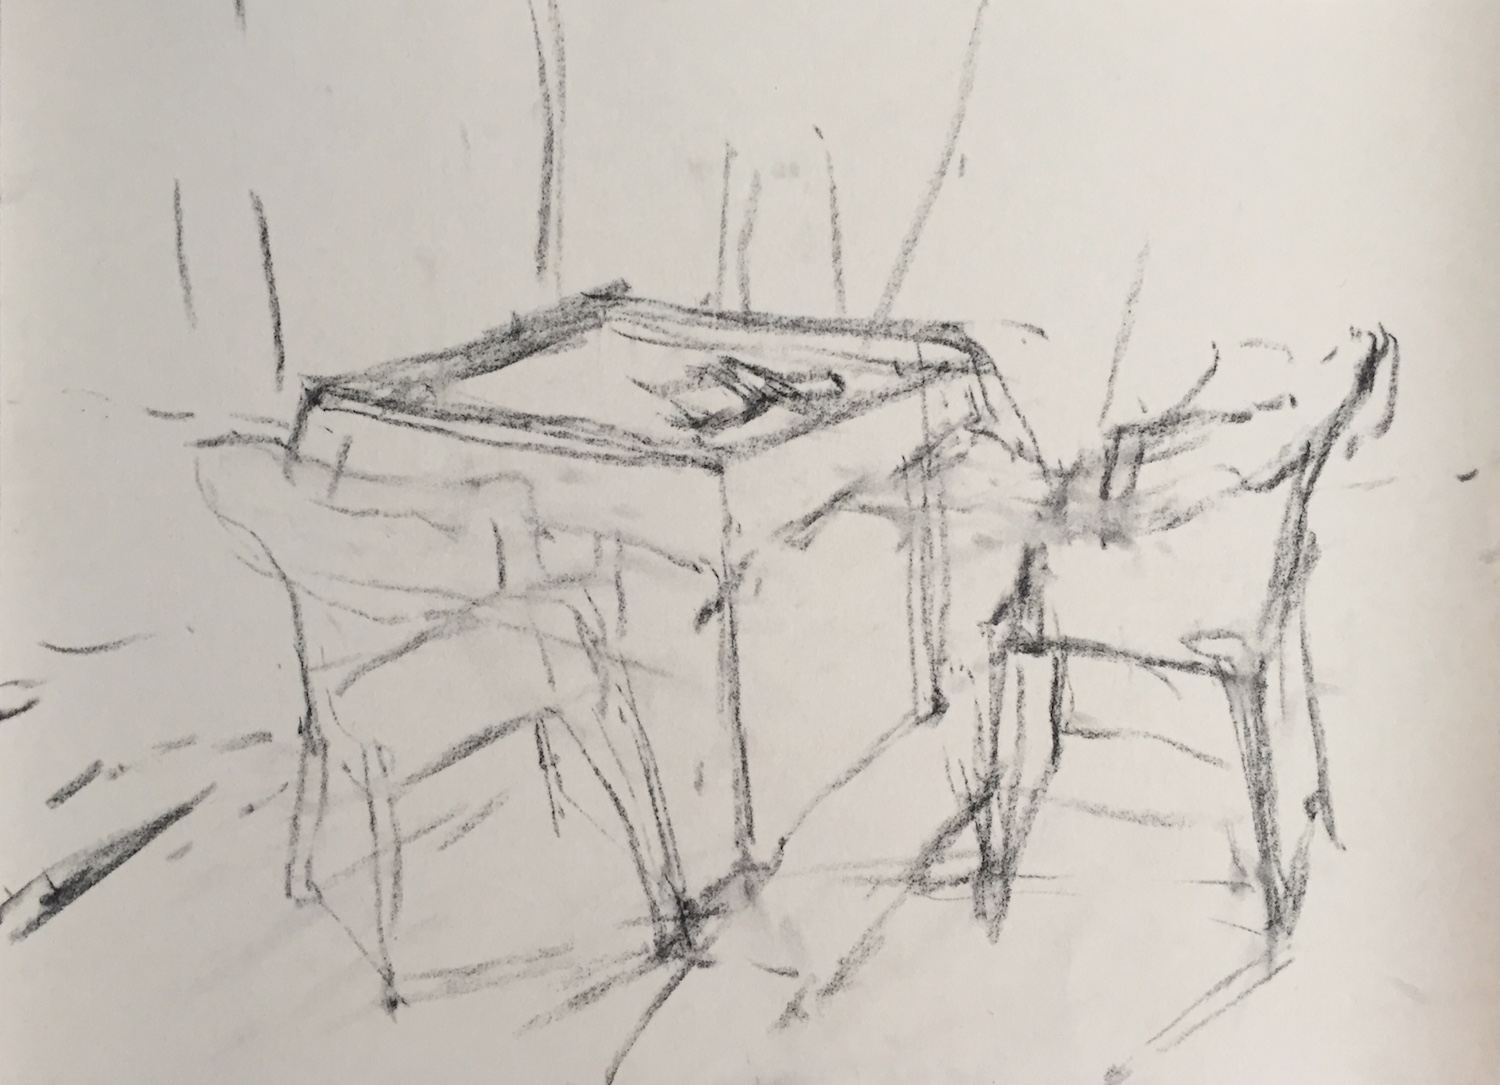 Chaos of Light And Shadow: 2. A quick placement of the main items of table and chairs, trying to get at least some correctness of perspective. Vine charcoal on UART 400.